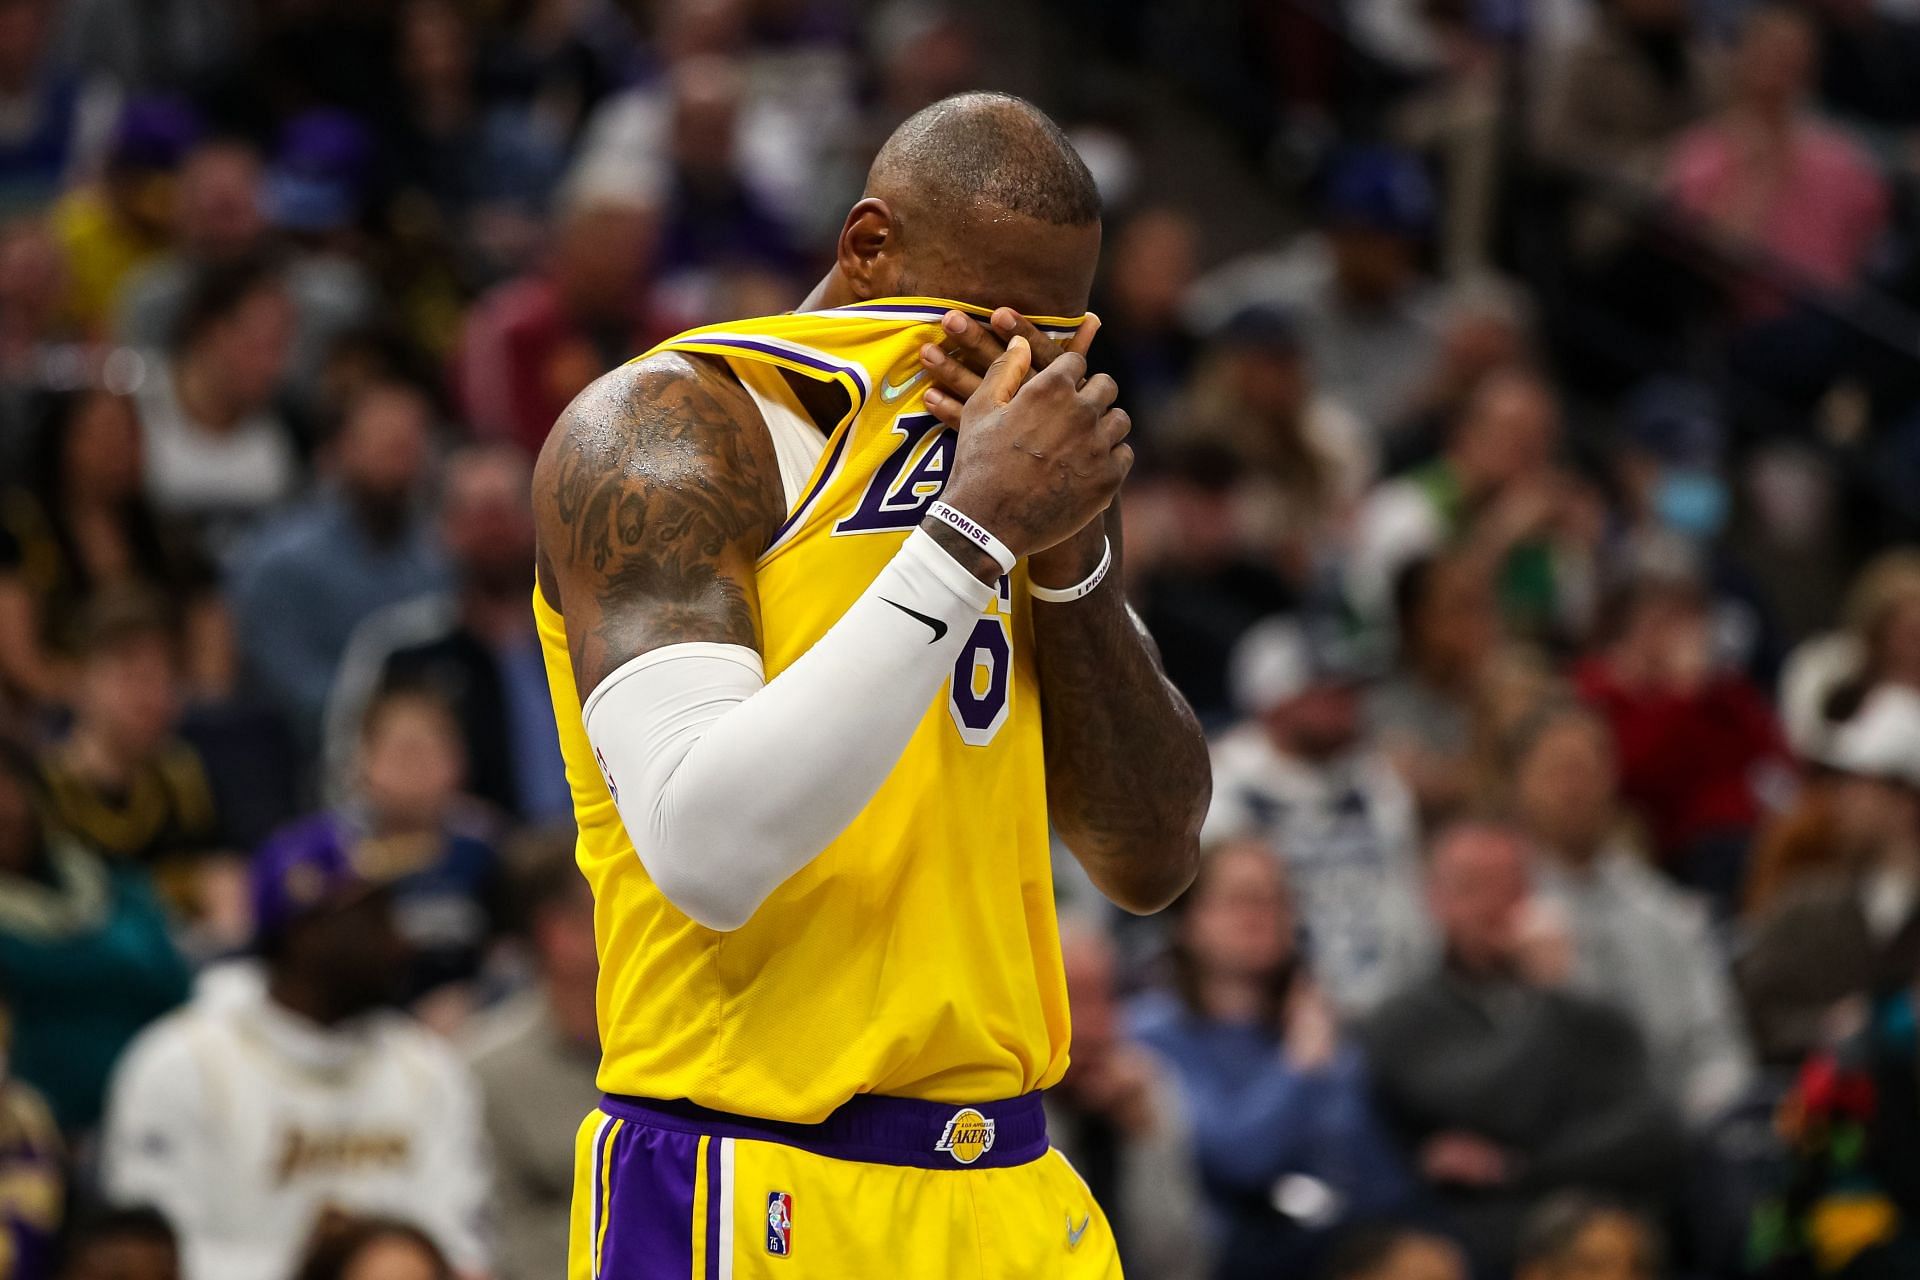 LeBron James of the LA Lakers wipes his face in the fourth quarter against the Minnesota Timberwolves at Target Center on Wednesday in Minneapolis, Minnesota. The Timberwolves defeated the Lakers 124-104.